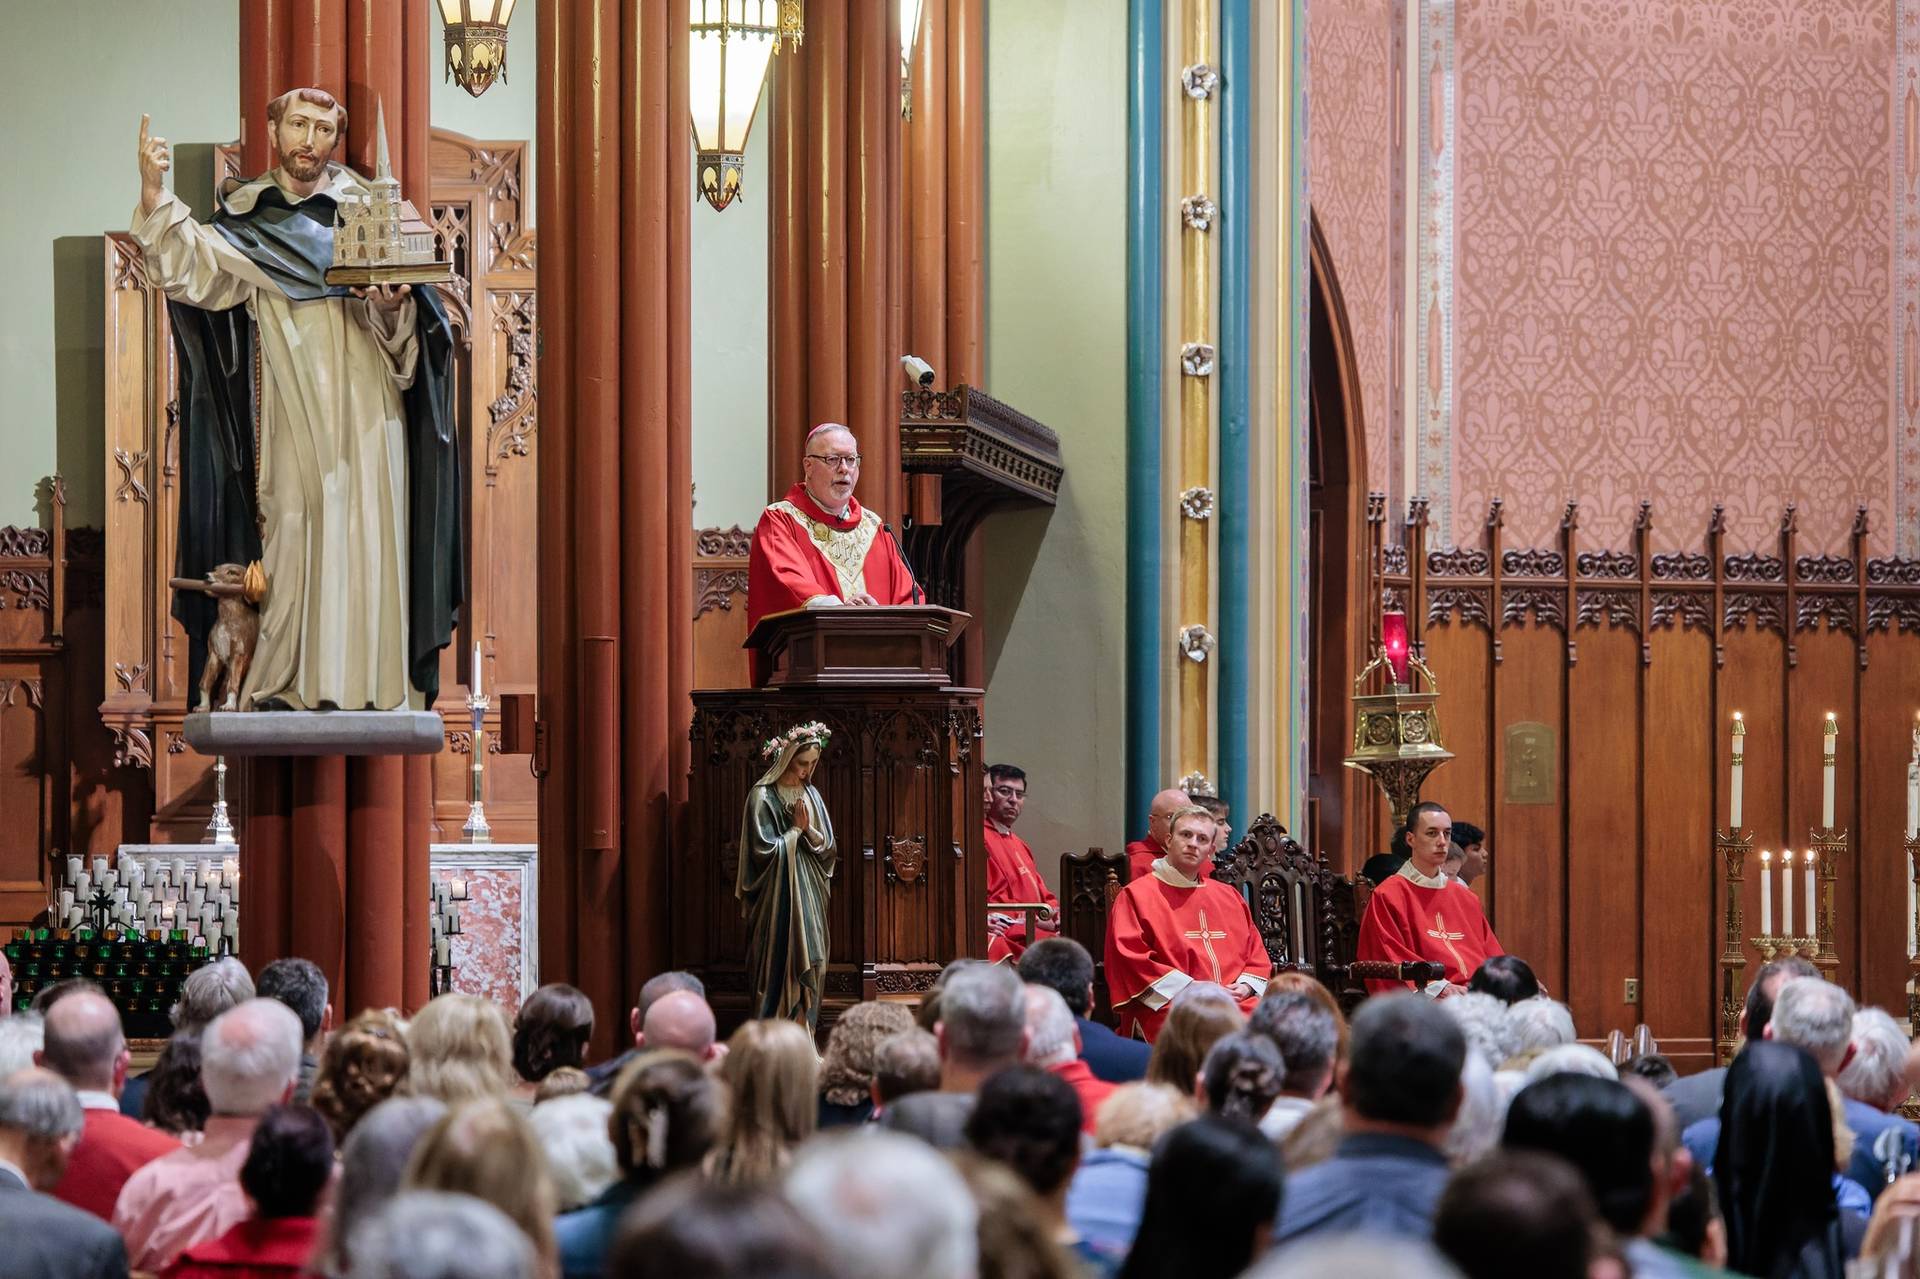 Archbishop Christopher Coyne of Hartford speaking from the pulpit of St. Mary Church in New Haven, Connecticut, on May 18. (Credit: Aaron Joseph/ Archdiocese of Hartford.)